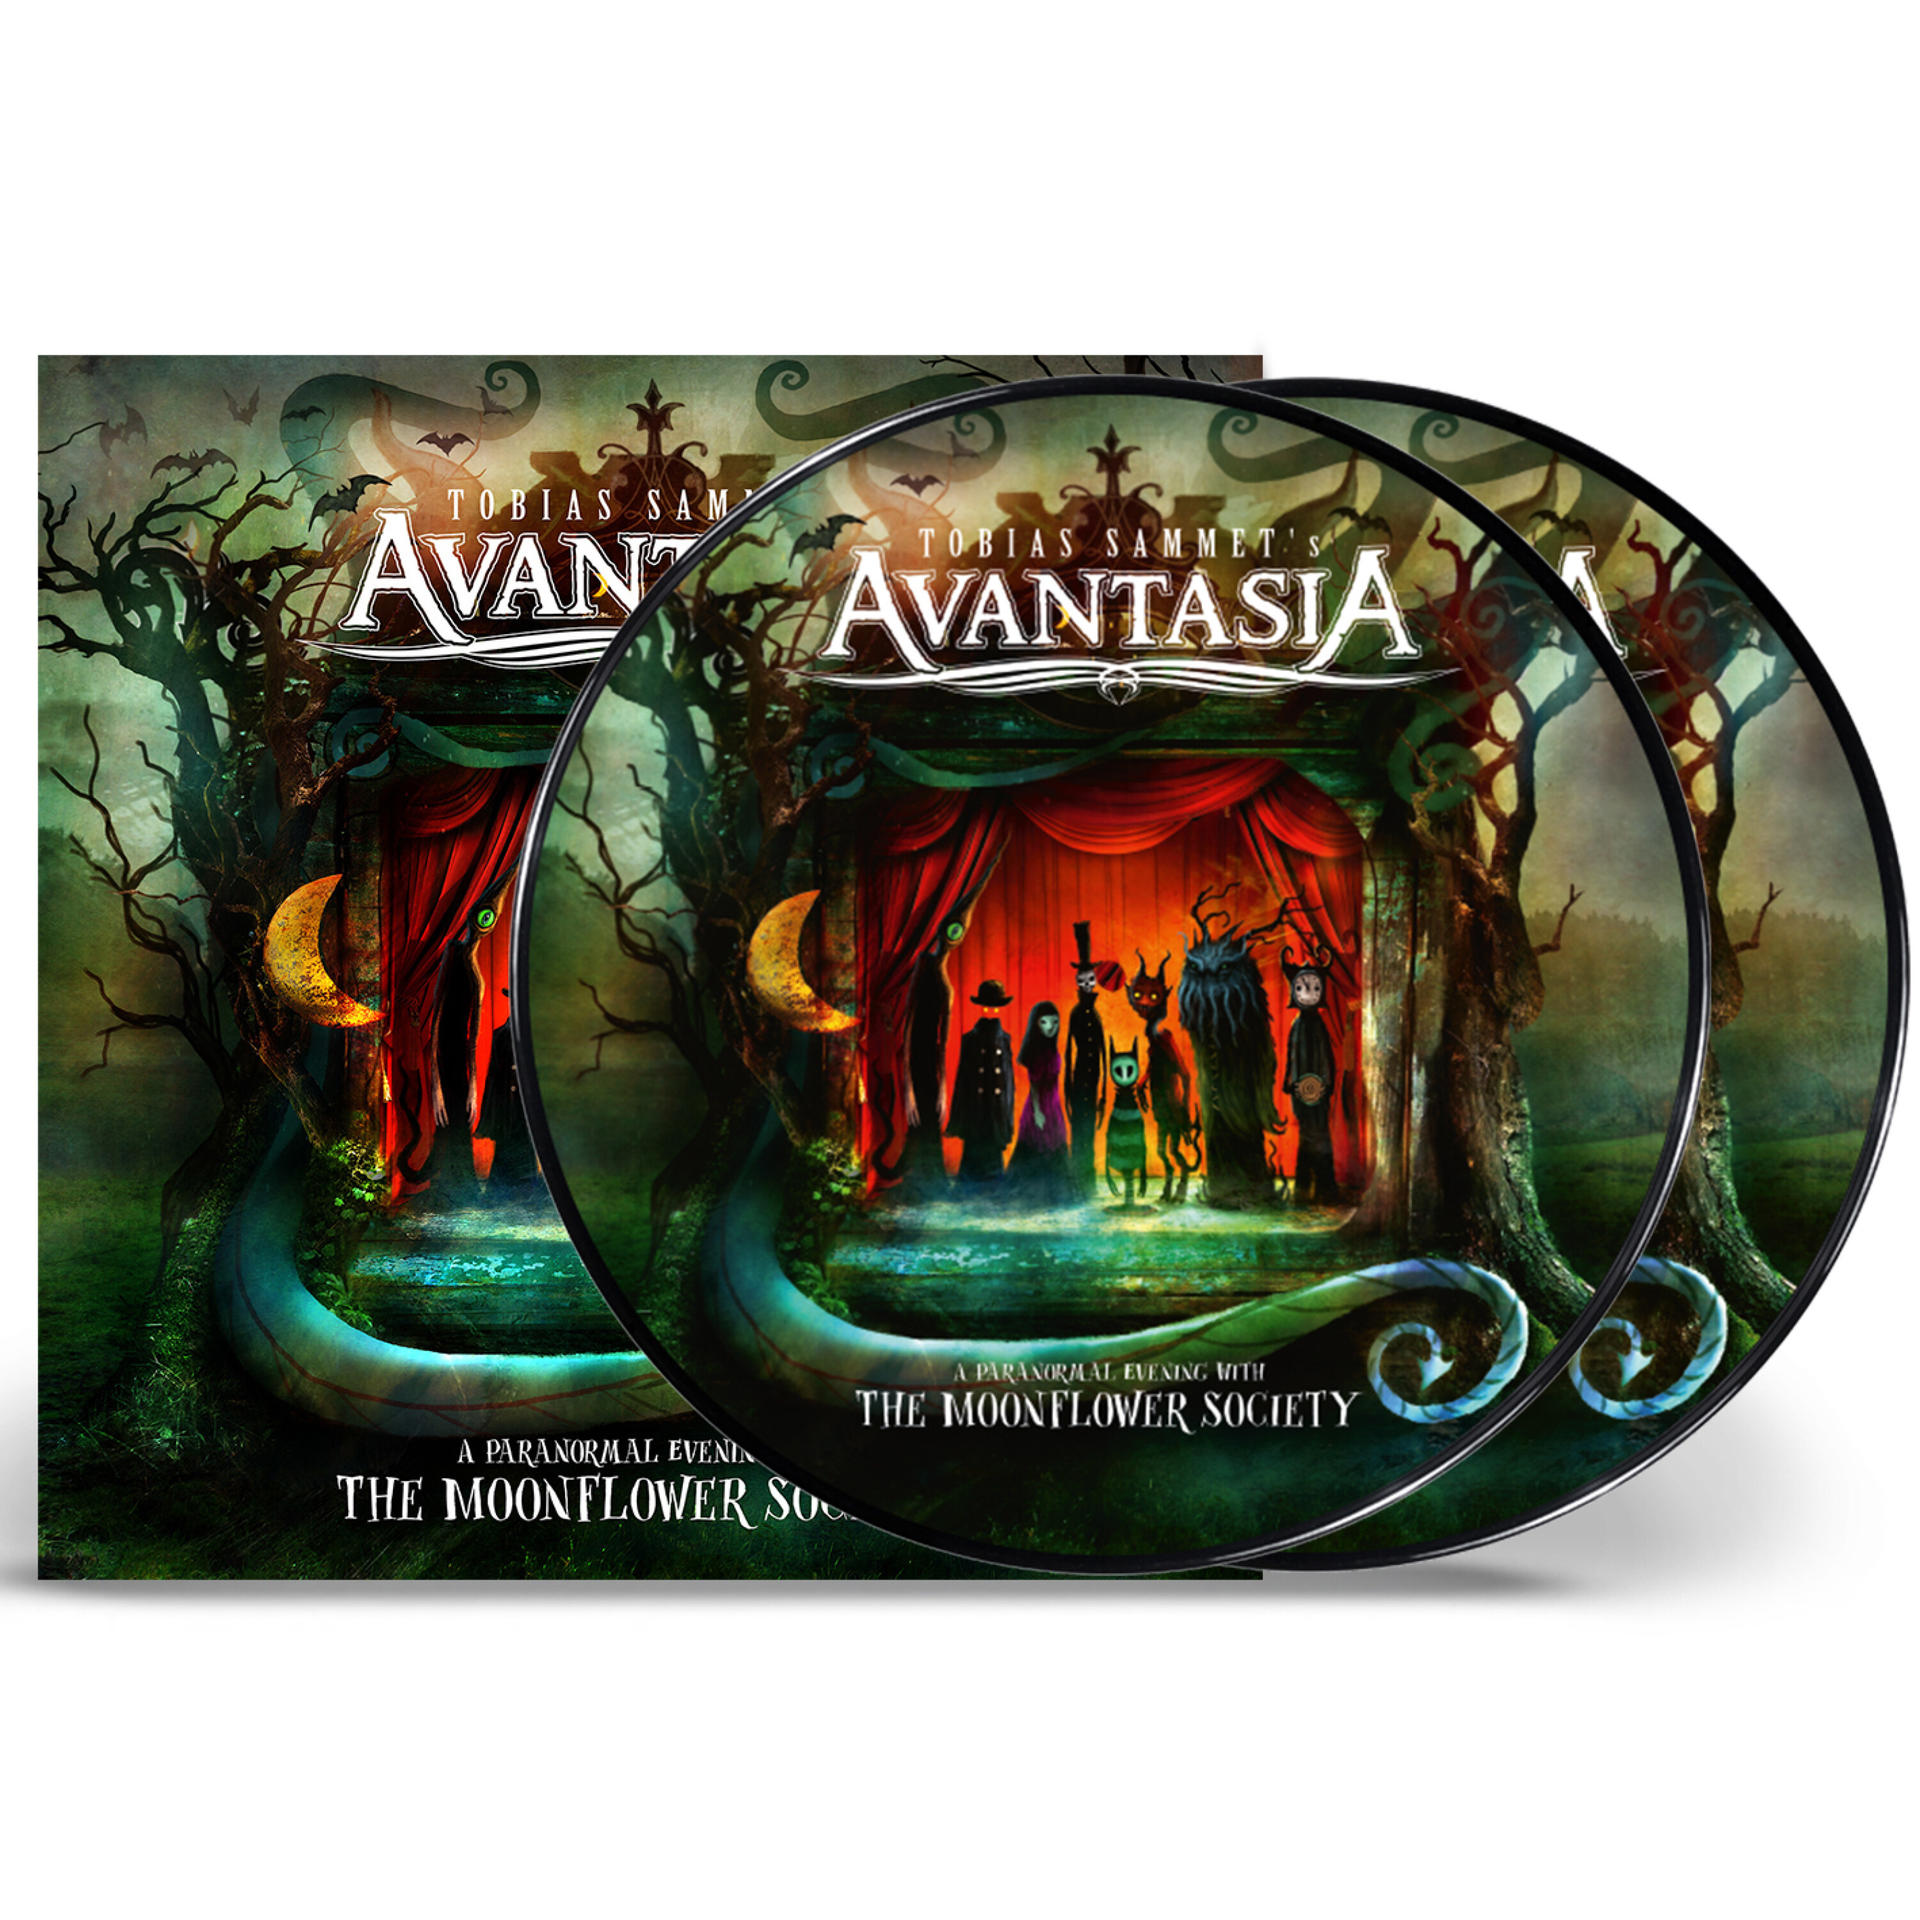 The Paranormal Evening 2LP Society Avantasia - - A With Moonflower (Vinyl) PIC